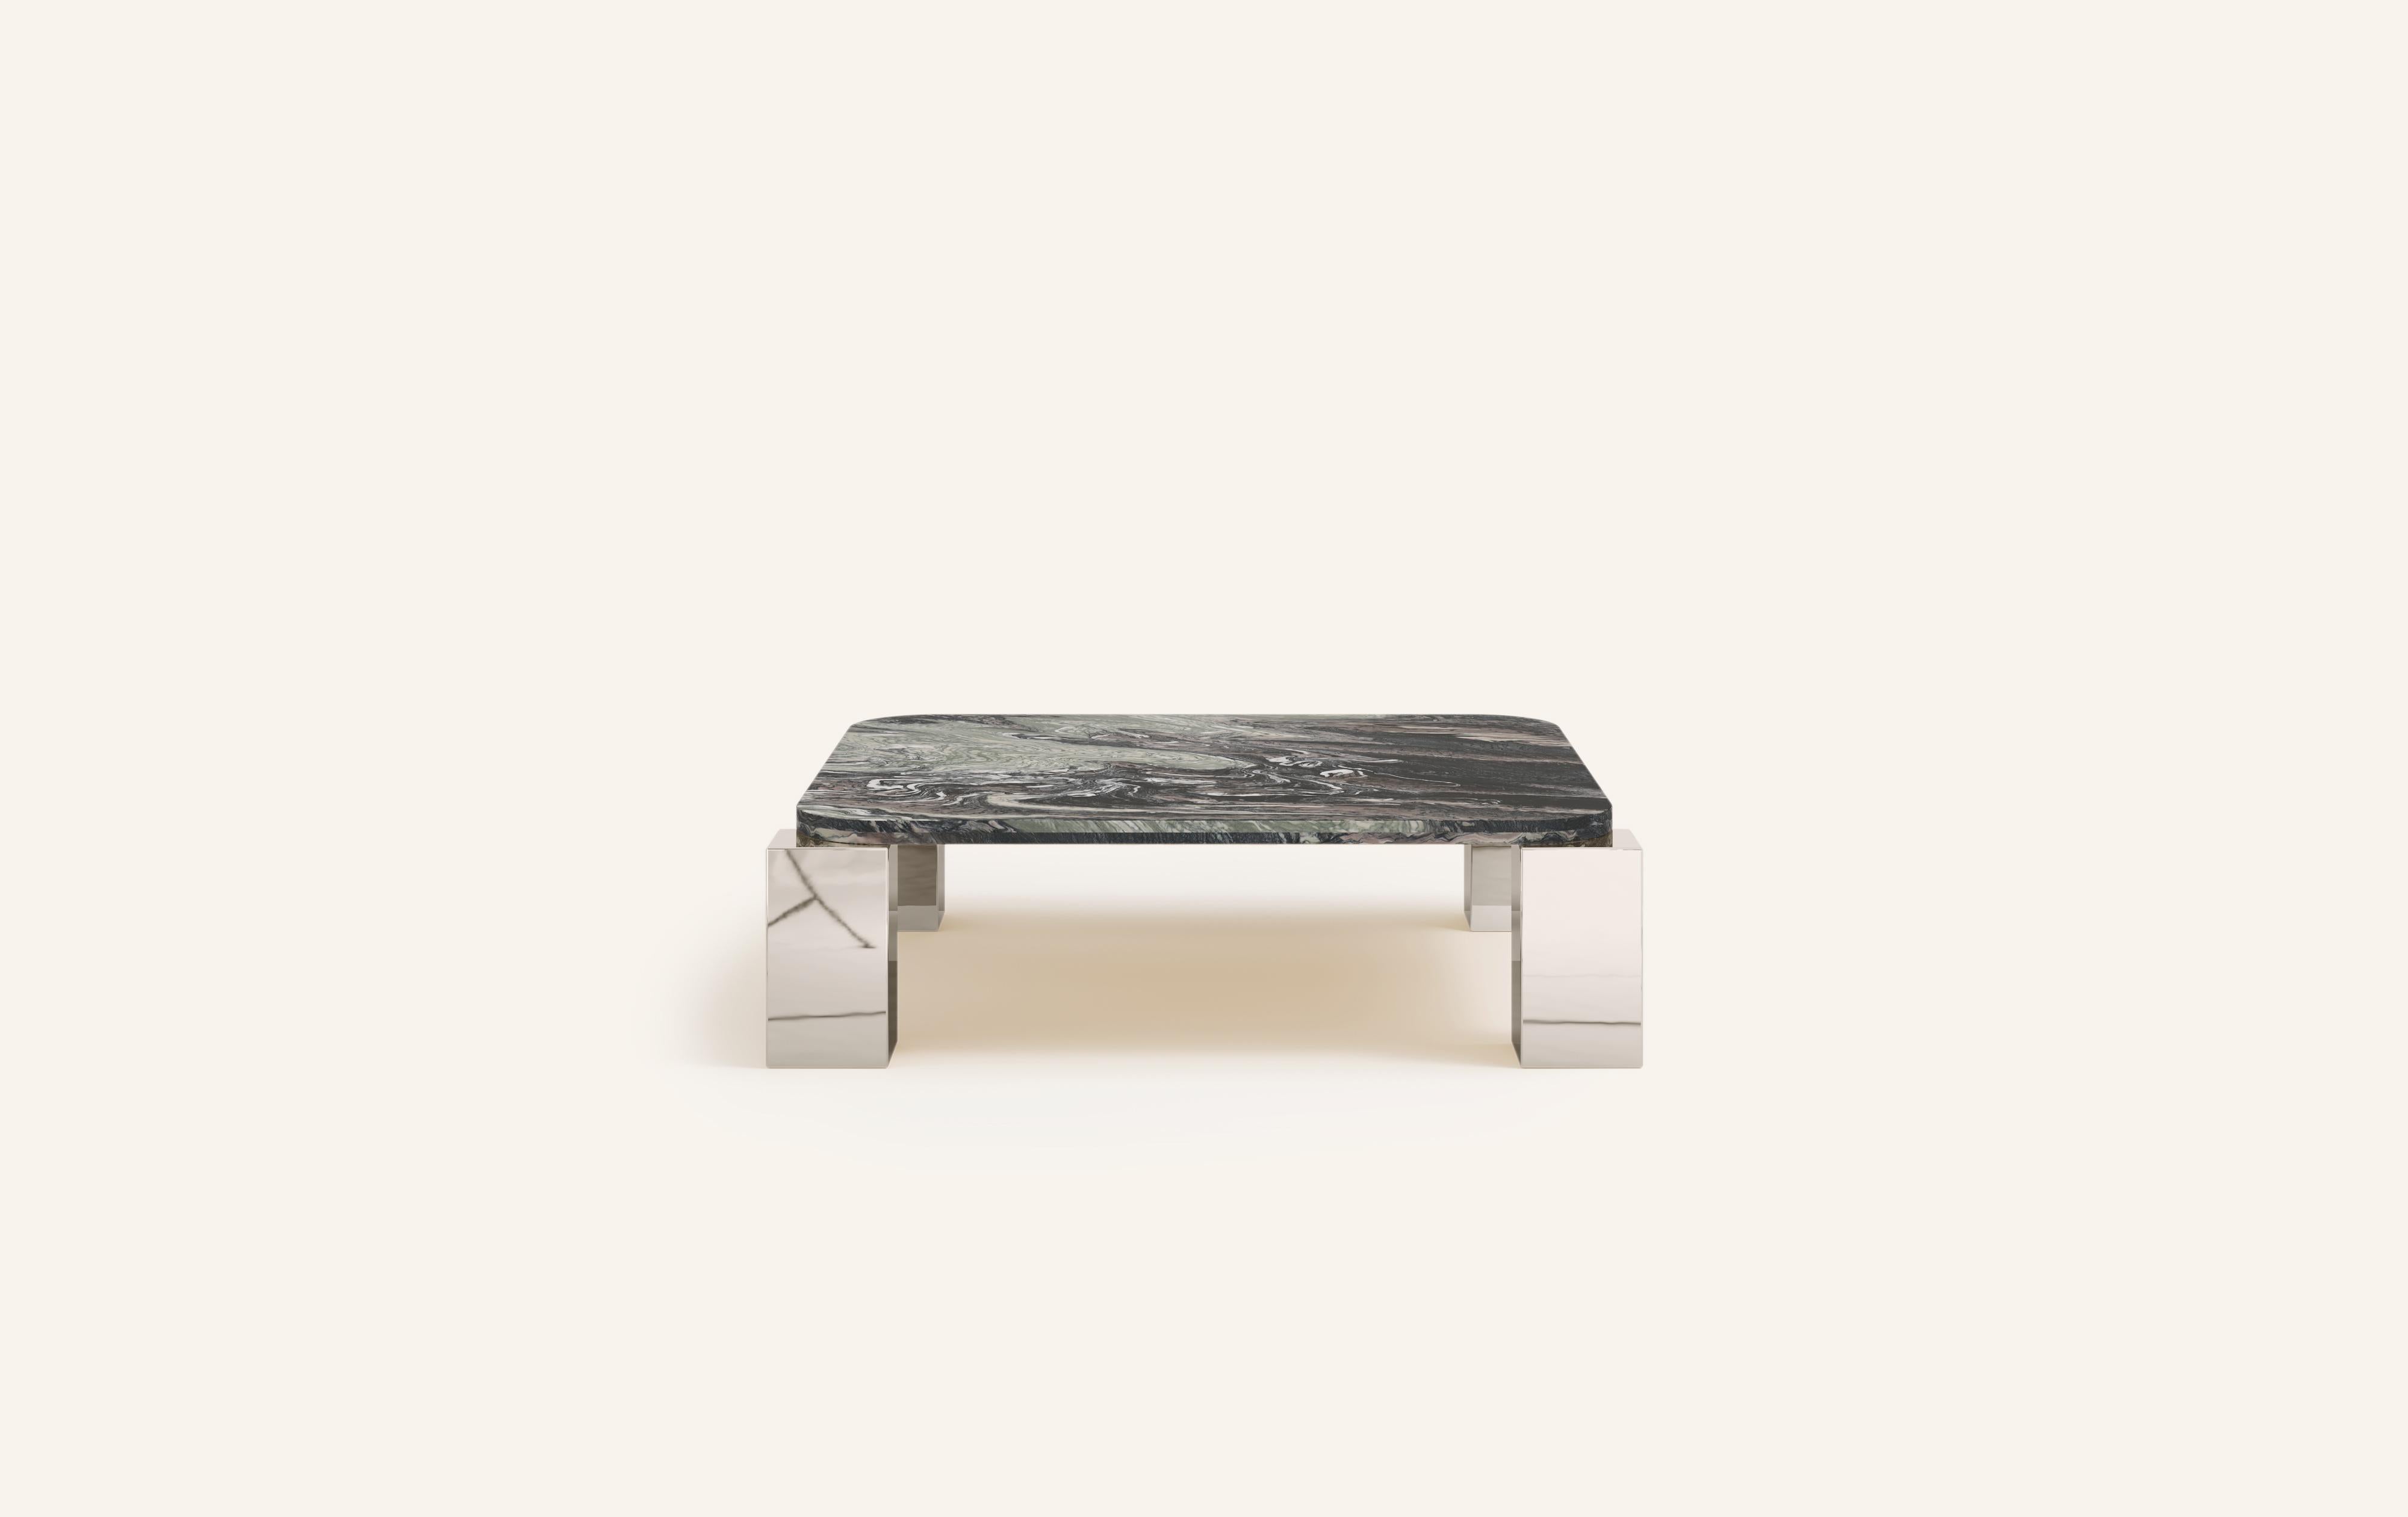 MONOLITHIC FORMS SOFTENED BY GENTLE EDGES. WITH ITS BOLD MARBLE PATTERNS CUBO IS AS VERSATILE AS IT IS STRIKING.

DIMENSIONS:
44”L x 44”W x 14”H: 
- 42”L x 42”W x 1.5” THICK TABLETOP WITH WITH 6